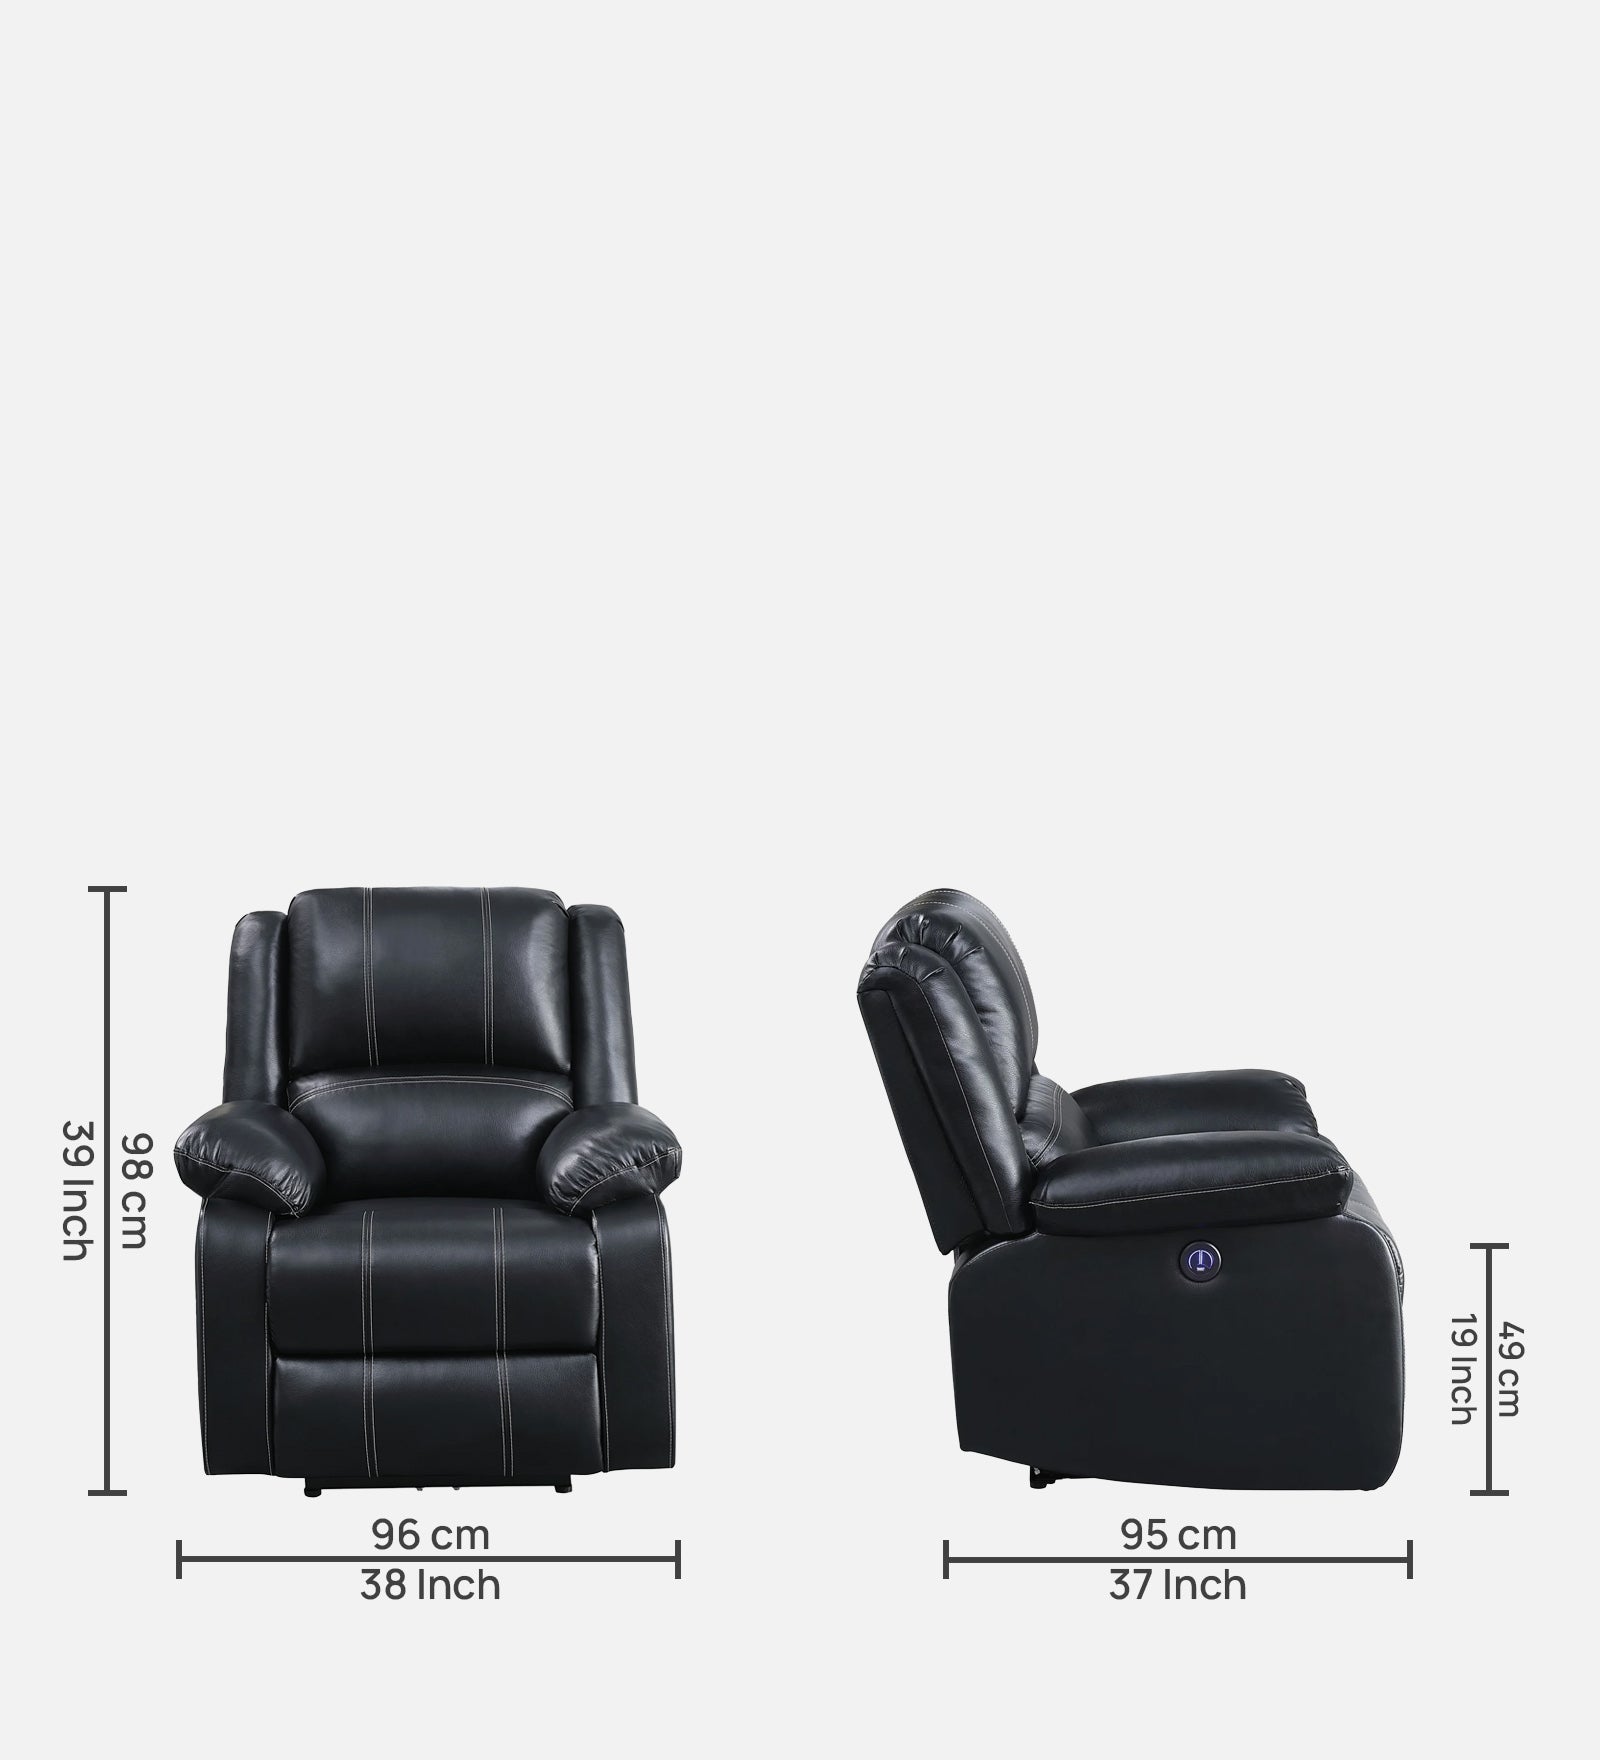 Santo Leather Motorized 1 Seater Recliner In Dark Black Leather Finish